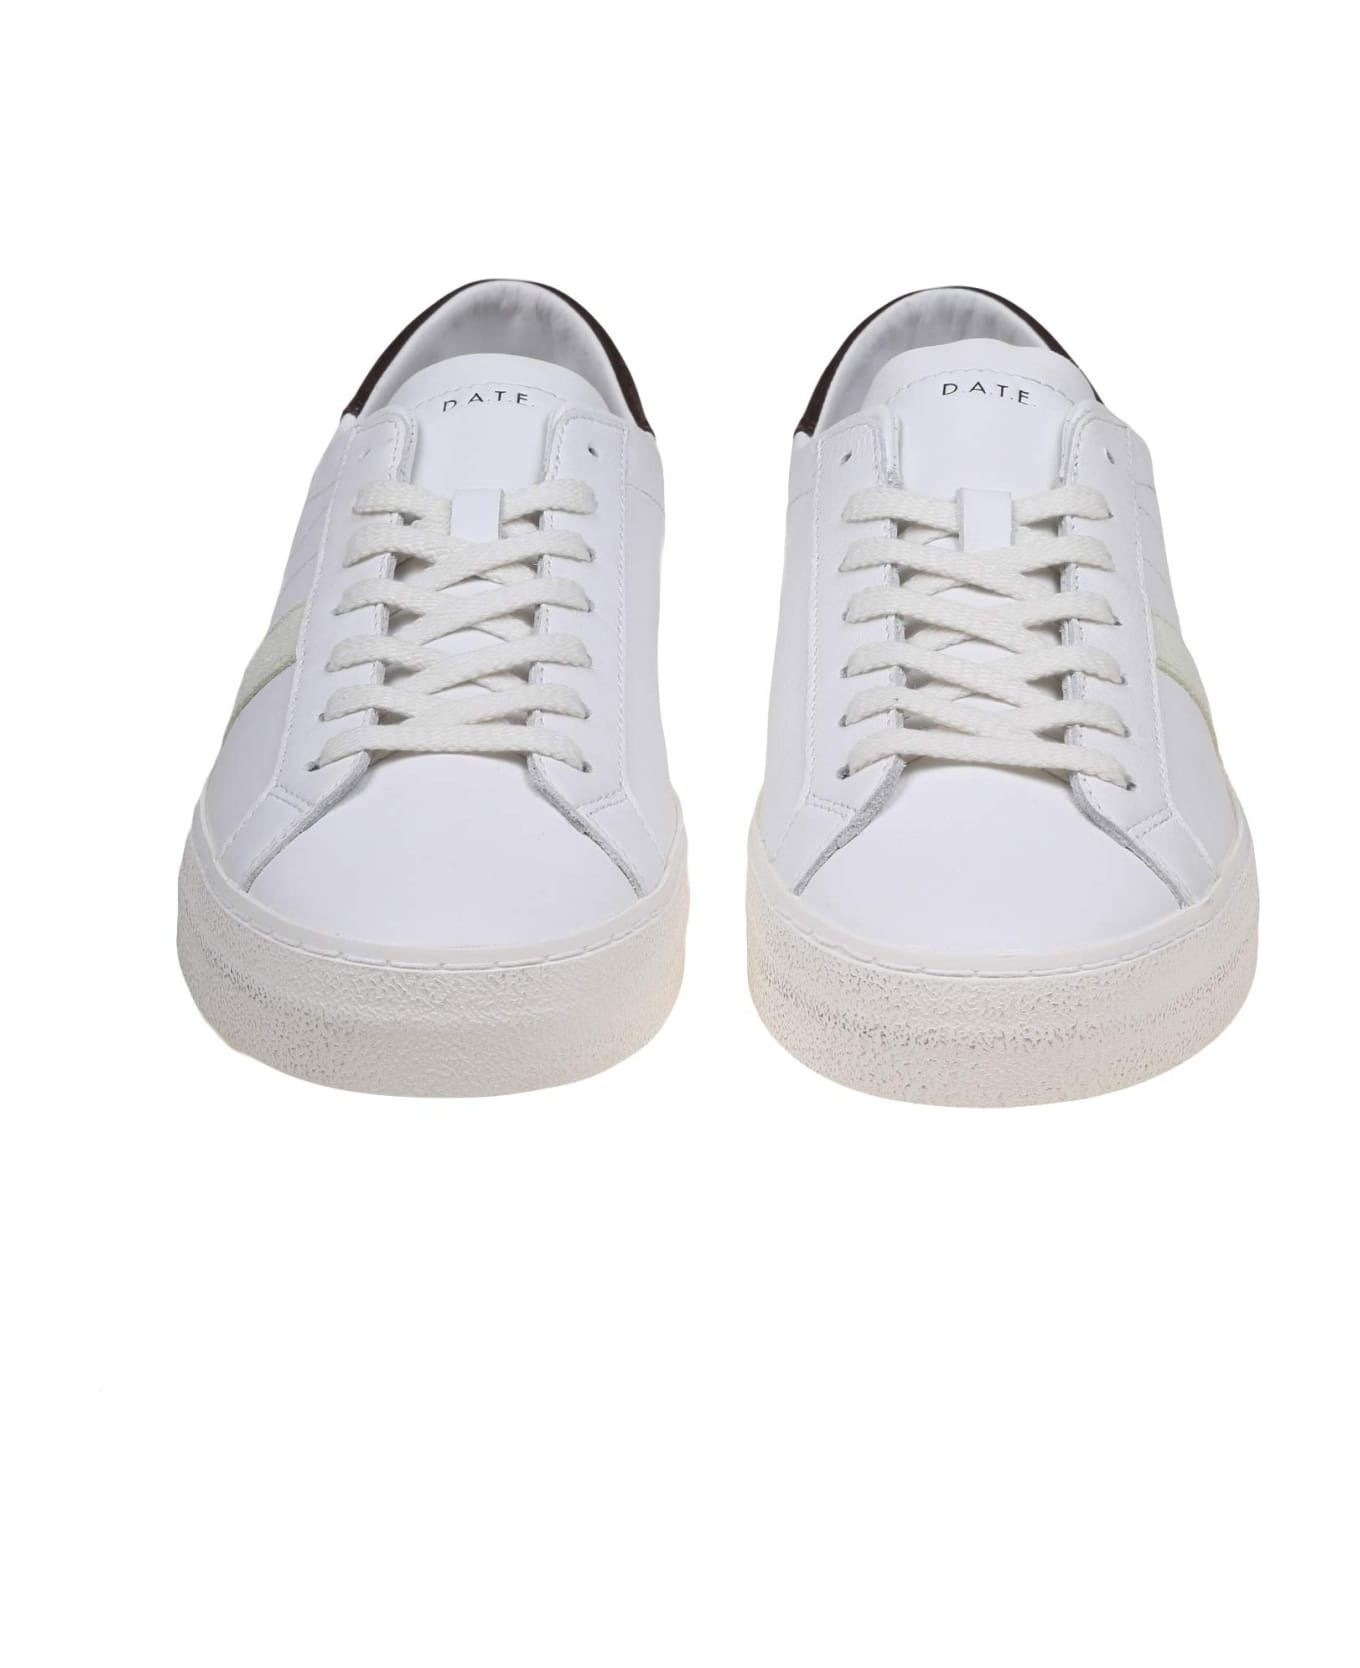 D.A.T.E. Hill Low Vintage Sneakers In White/brown Leather - WHITE/MORO